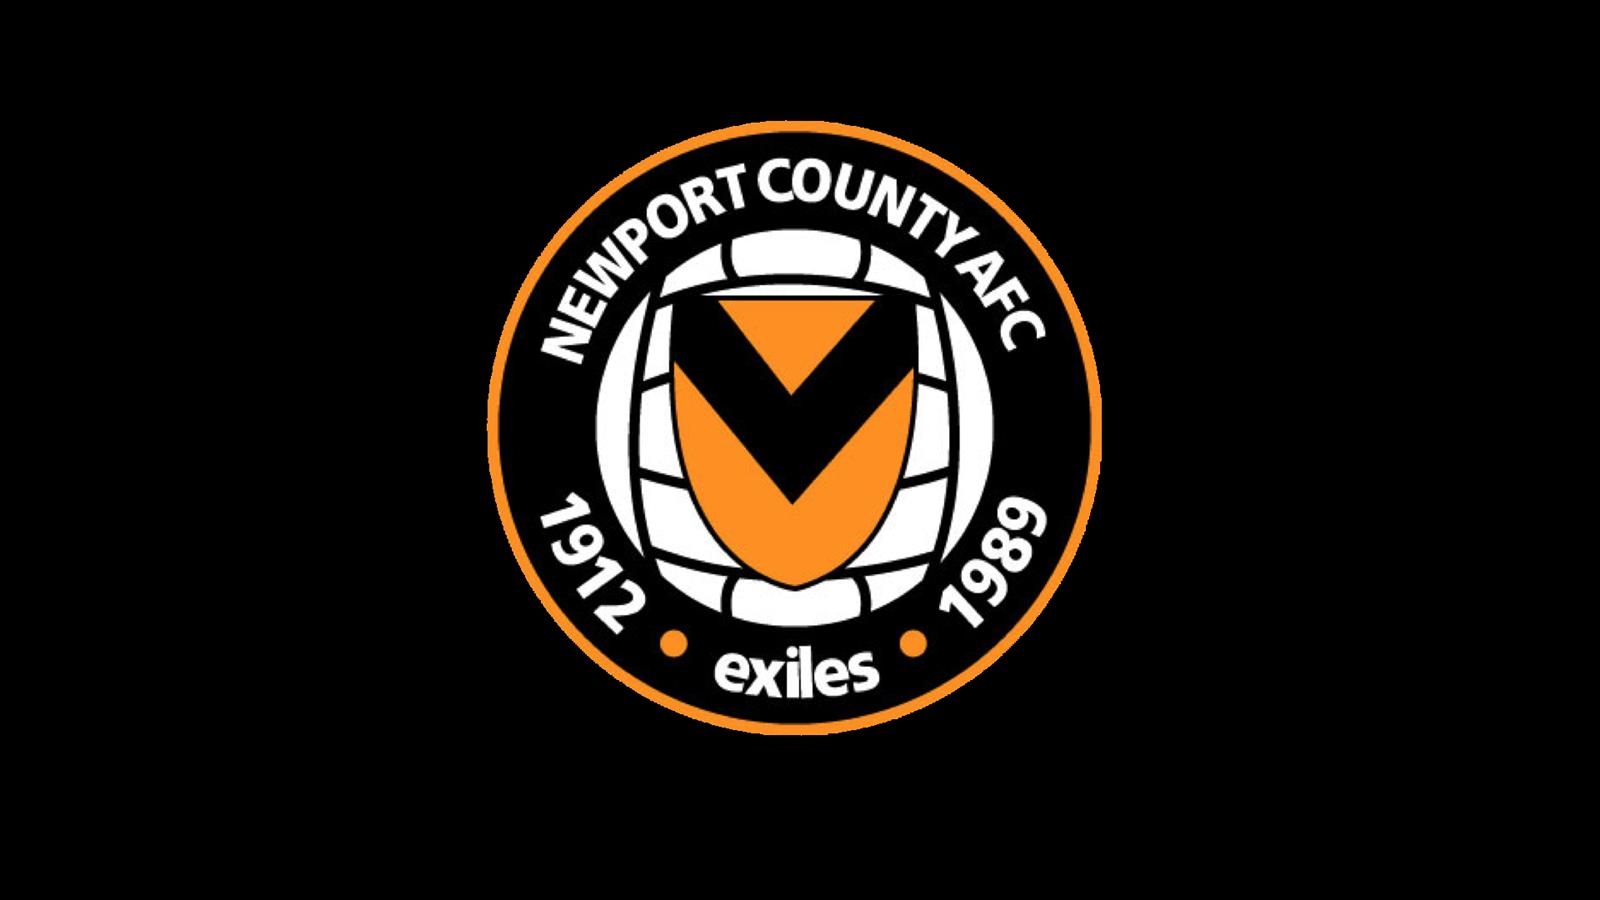 Walsall v Newport County has been moved